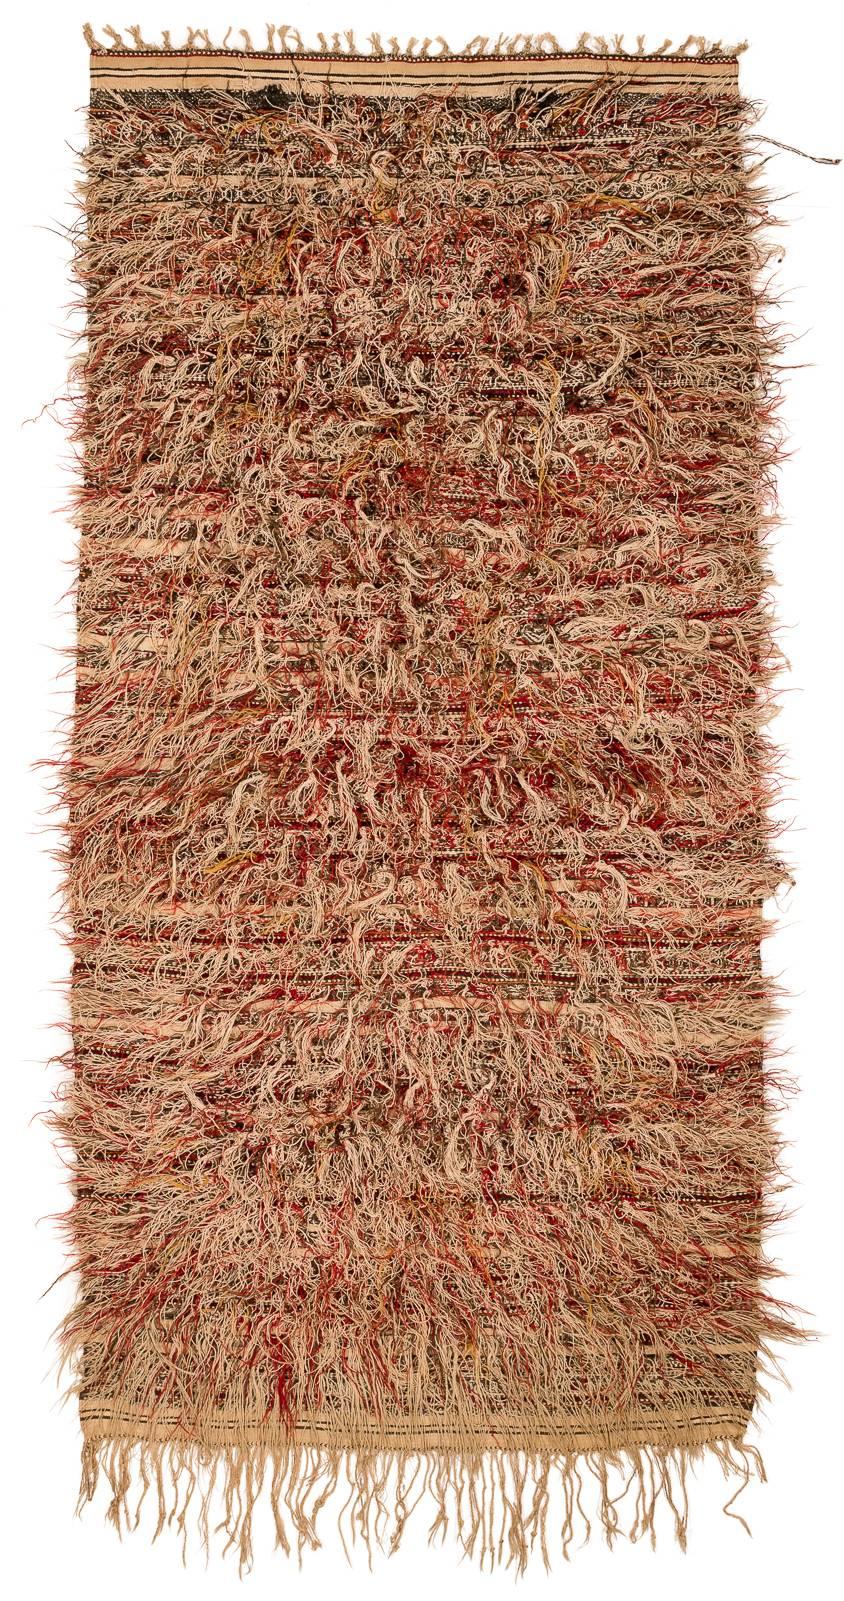 This would make an incredible wall hanging. This vintage piece is of the best quality- please see the details for an indication of the skill involved in this weaving. A highly collectible piece. Measures: 3' x 6'.